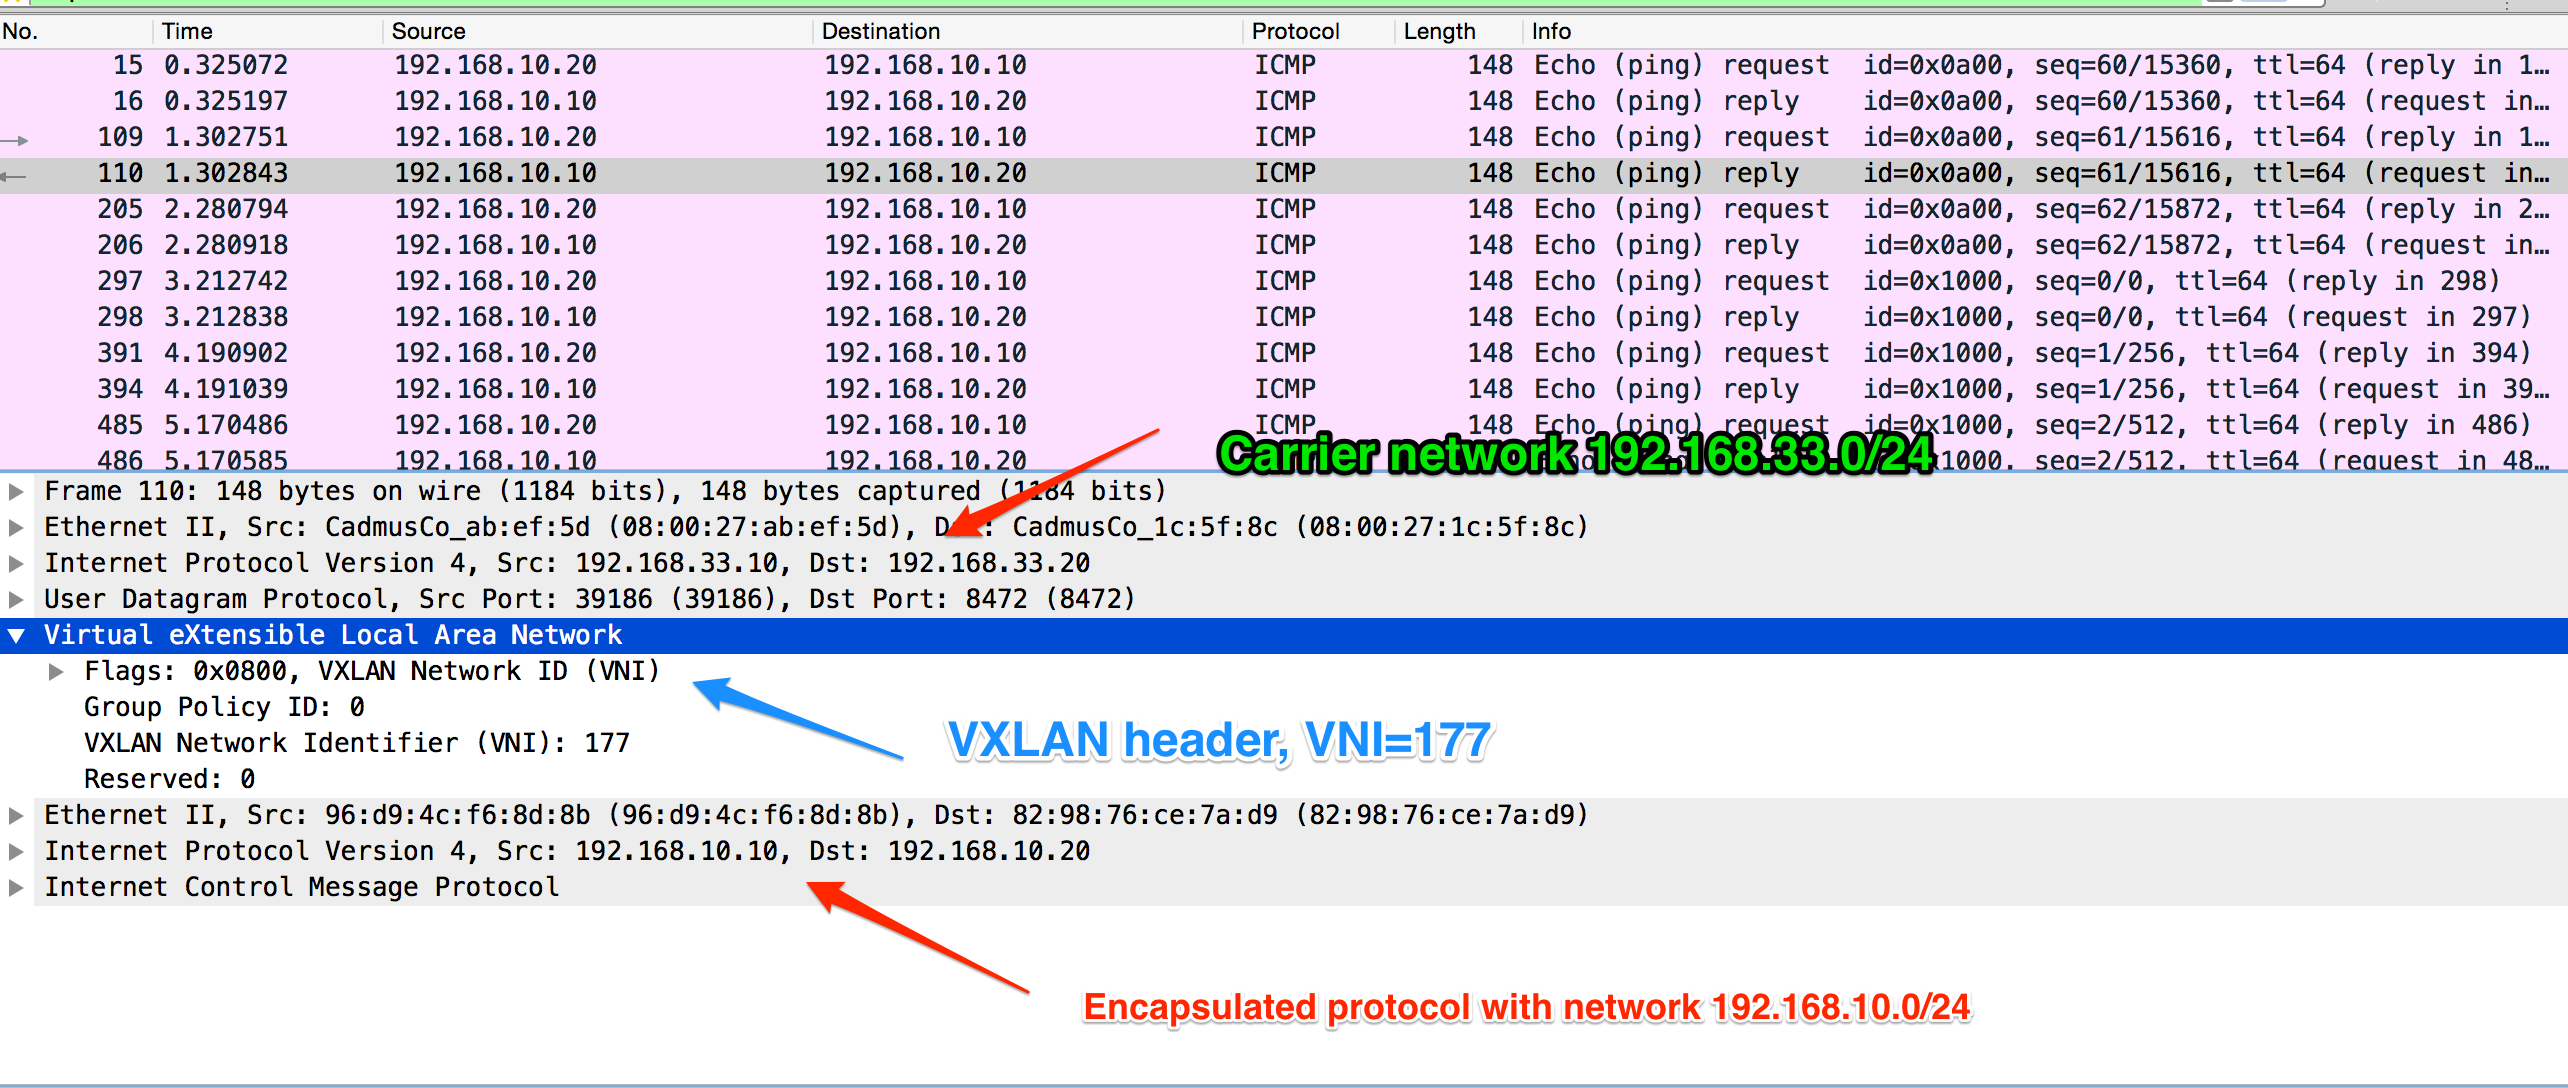 VXLAN container traffic